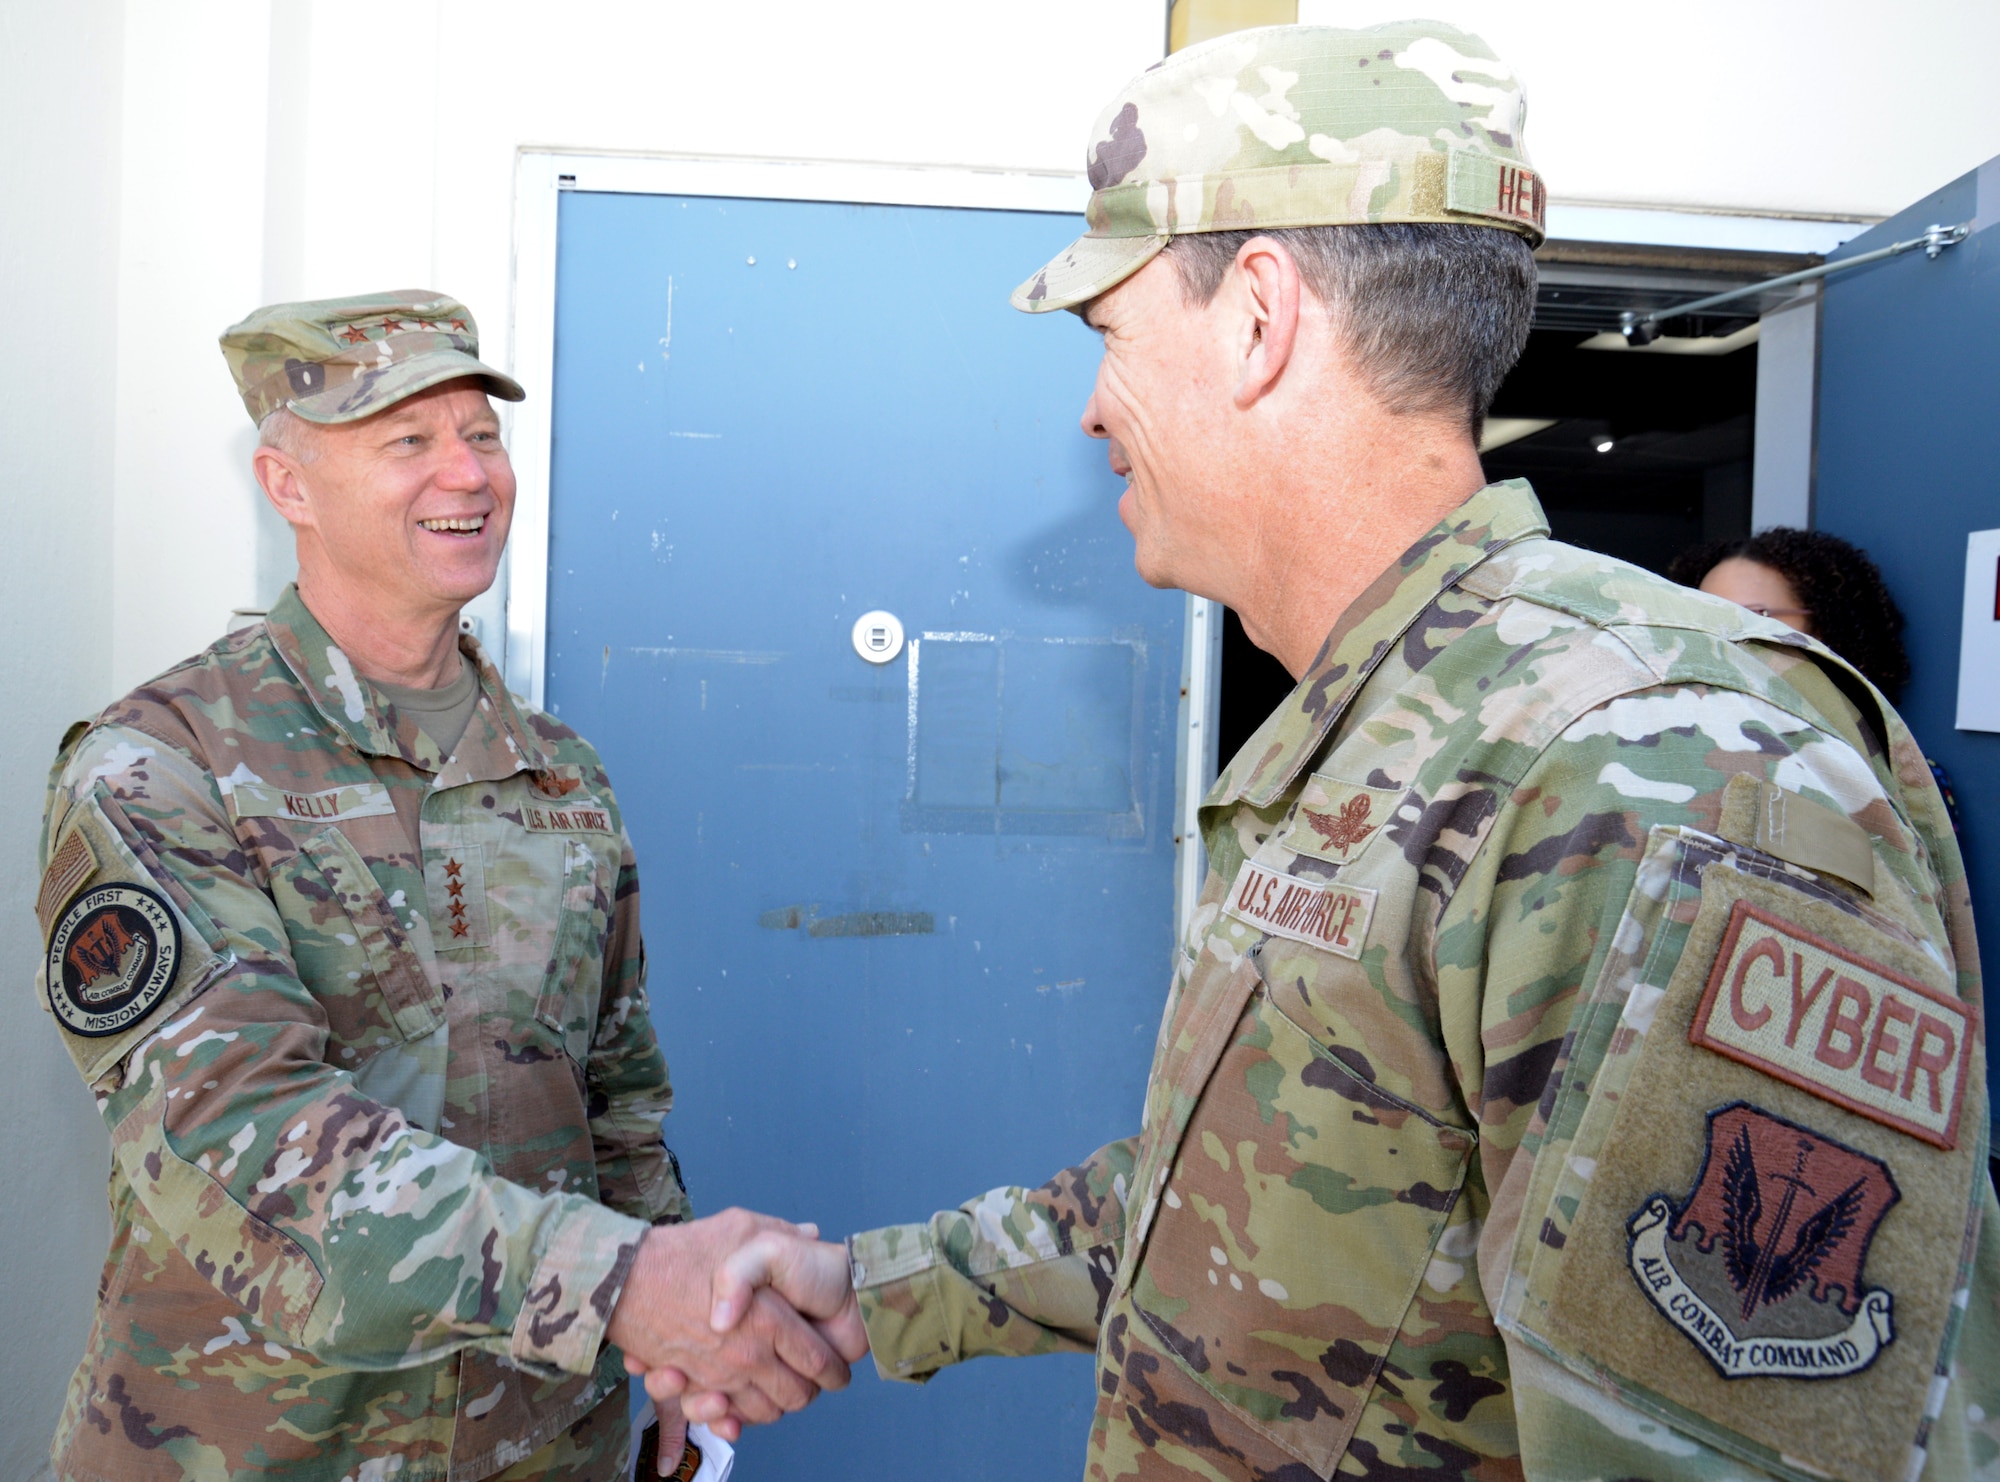 Gen. Mark Kelly, commander of Air Combat Command, toured the 16th Air Force and its local subordinate wings along with Command Chief Master Sgt. John Storms, ACC, to familiarize themselves with the wing’s intelligence and cyber operations missions and the officers, enlisted and civilians who meet those missions on a daily basis.